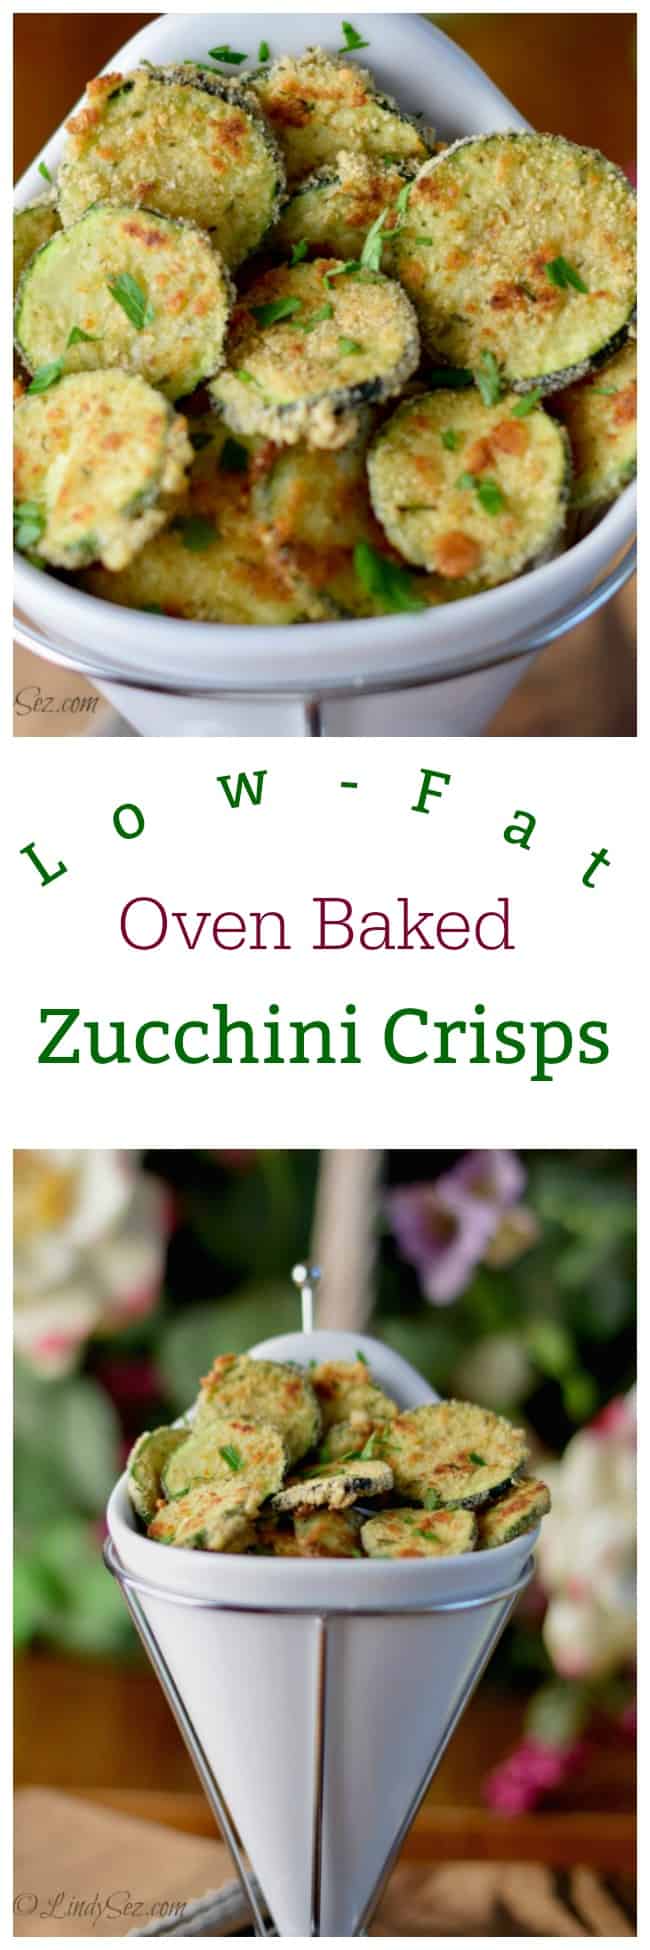 Low-Fat Oven Baked Zucchini Crisps